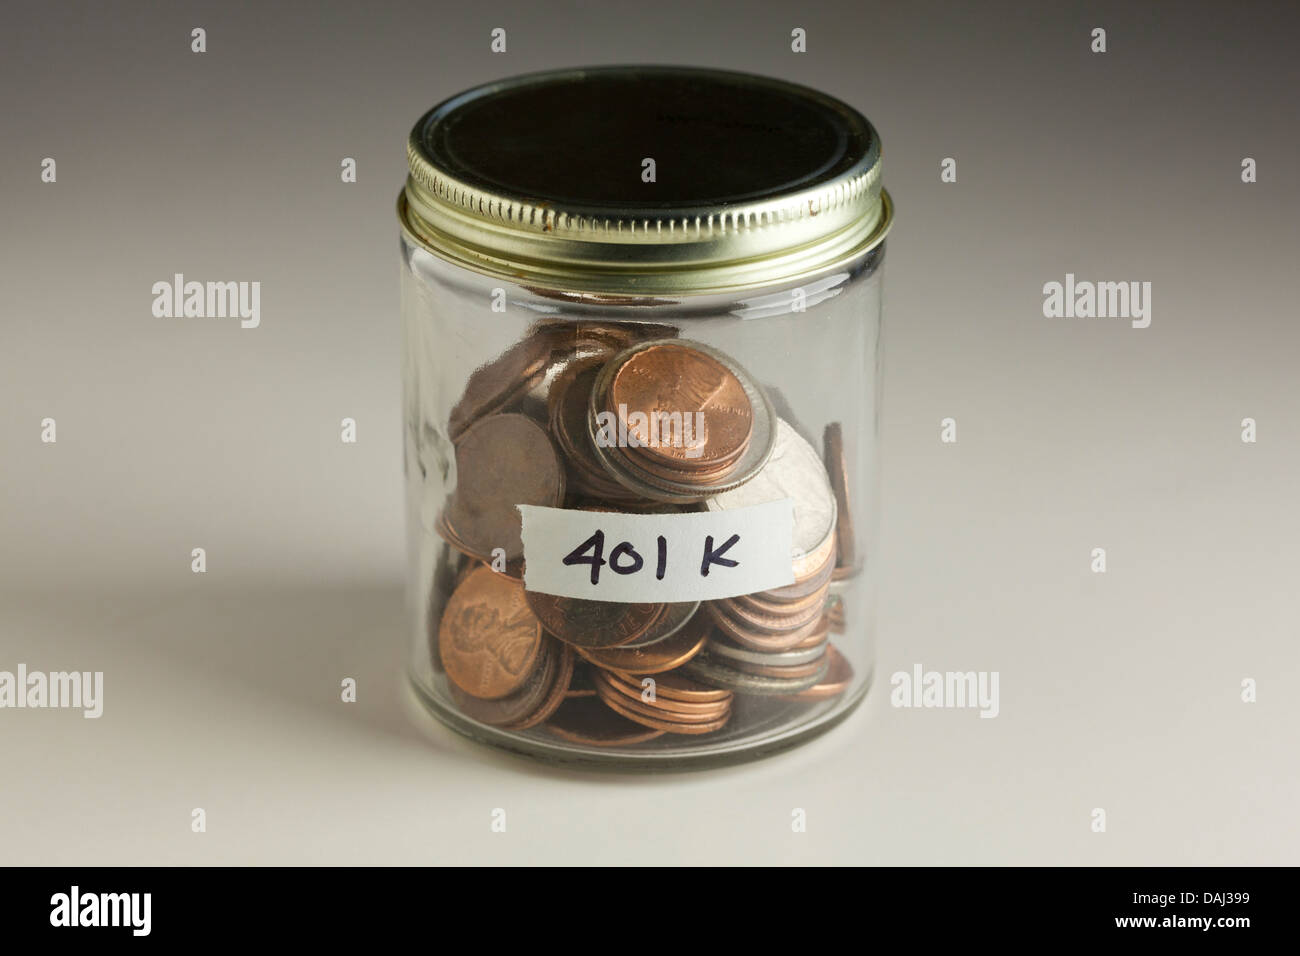 Coins in glass jar for 401k savings Stock Photo